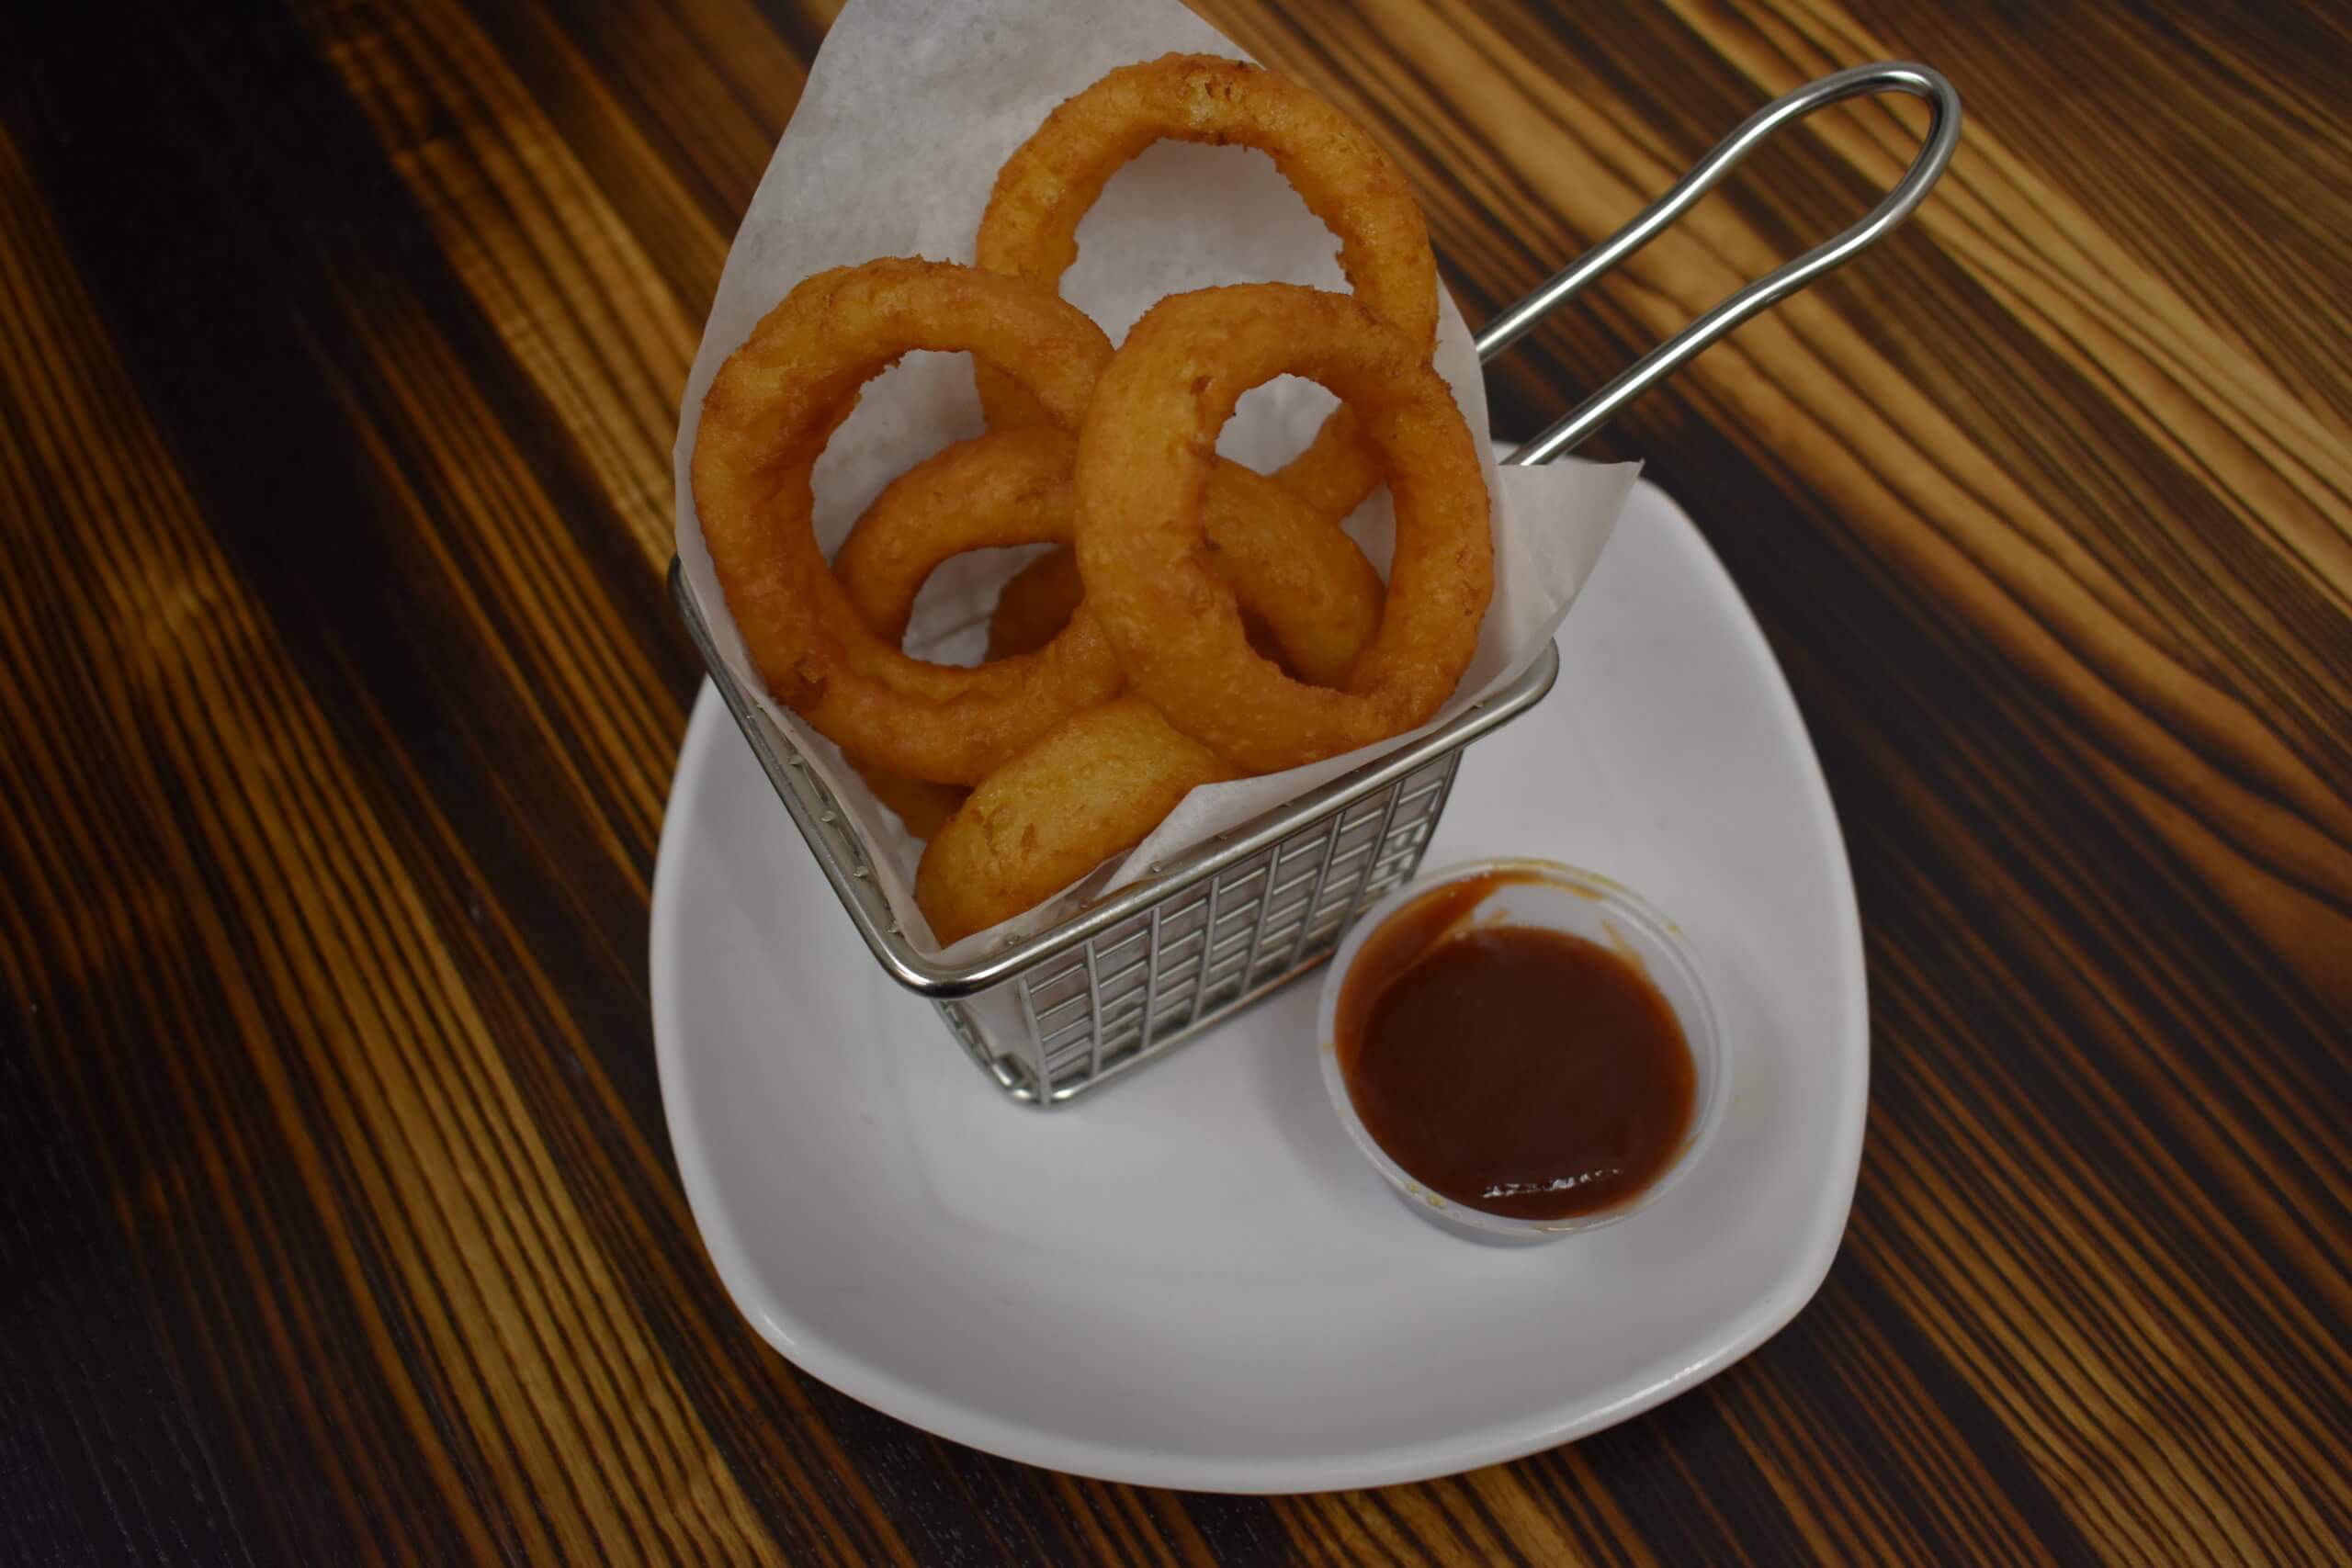 Onion rings appetizer at Pequod's Pizza.